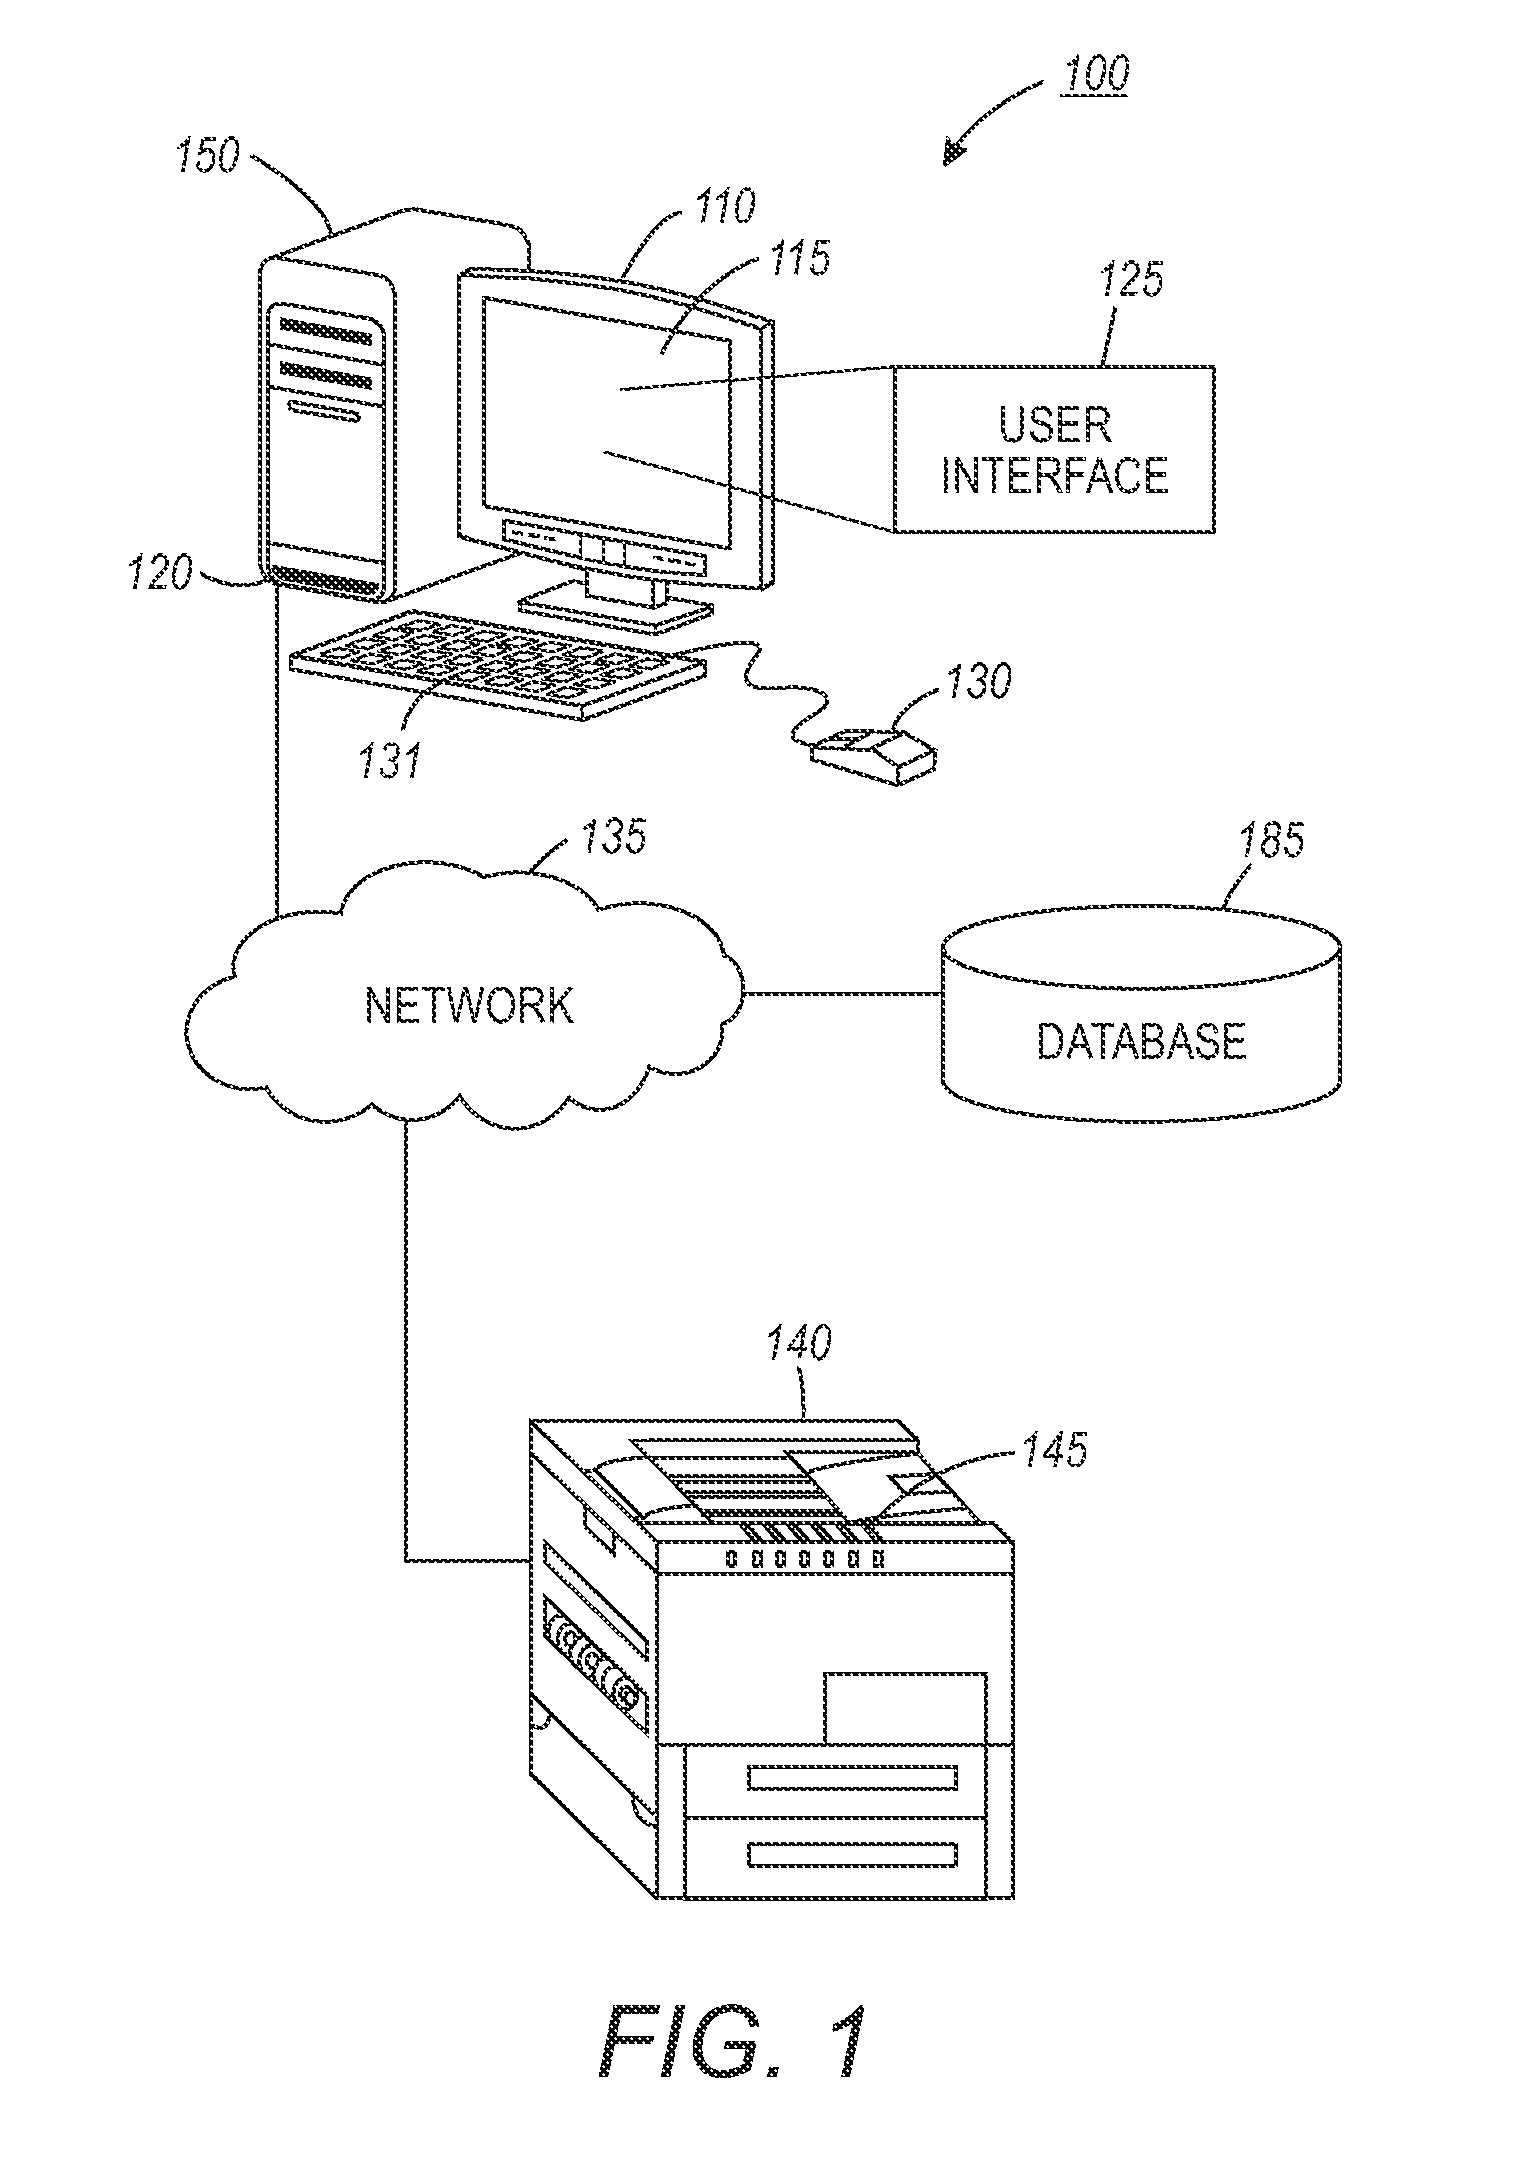 Method, system and processor-readable medium for automatically selecting a job tracking source